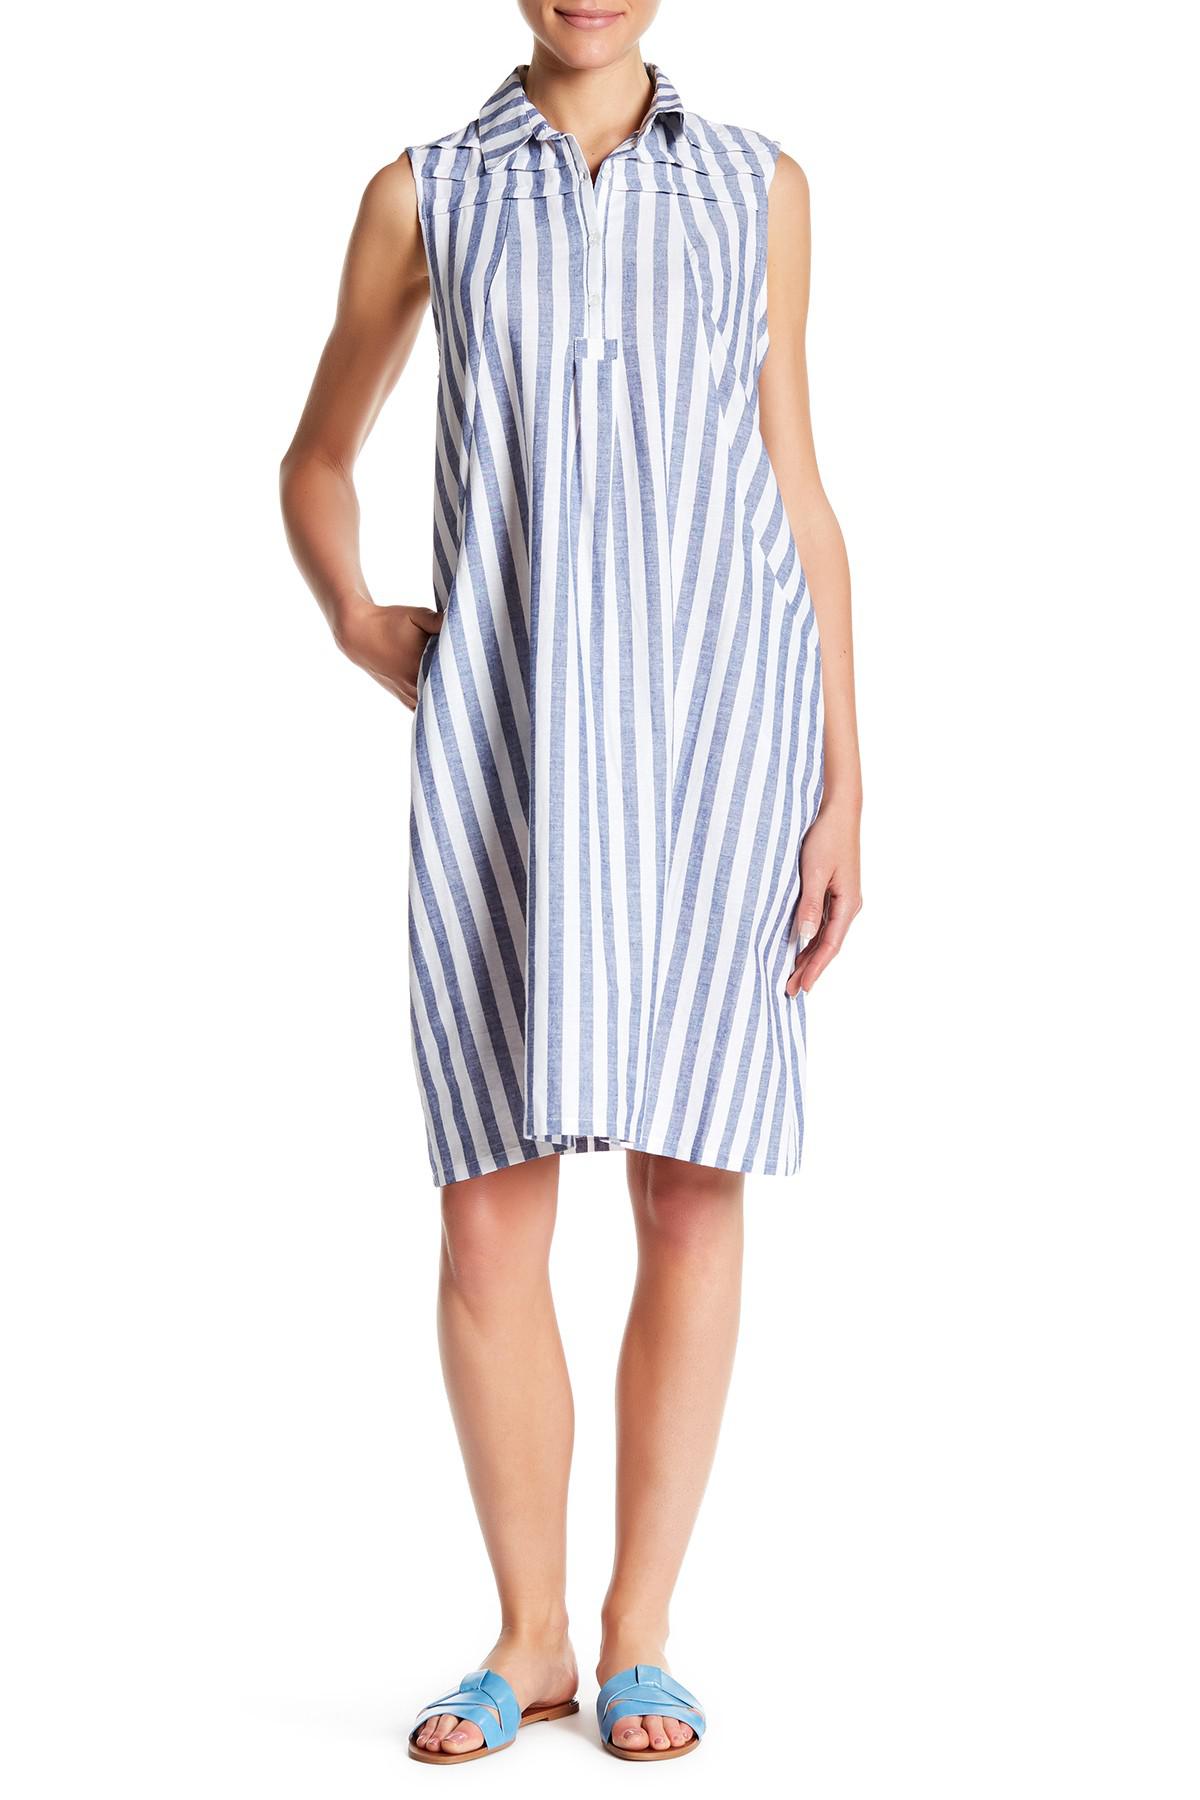 HOPE AND HARLOW Striped Print Linen Dress in White | Lyst